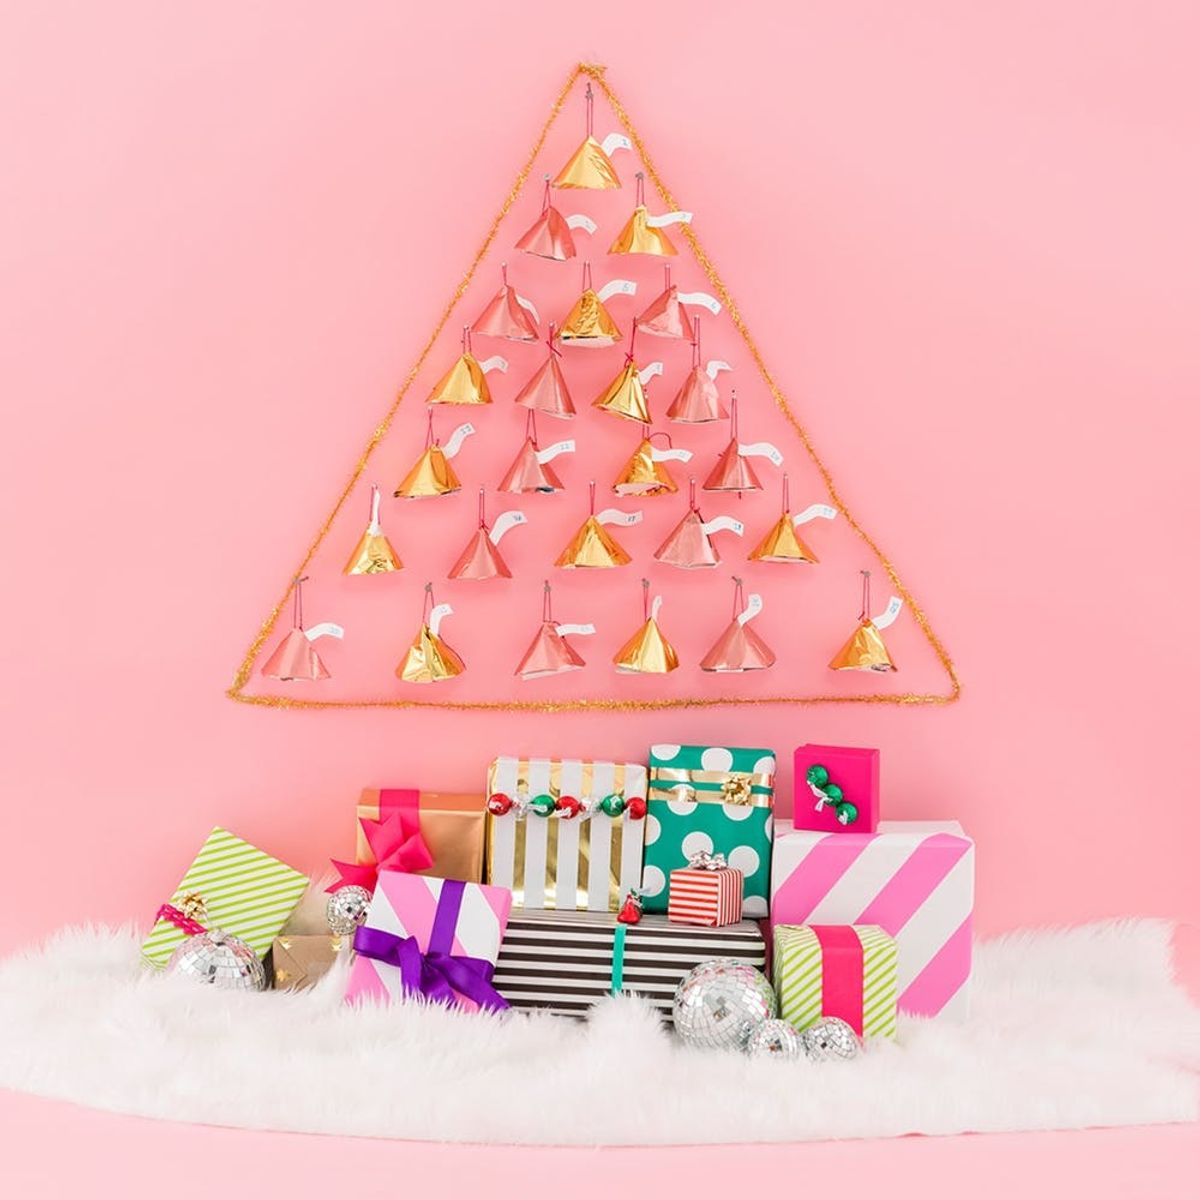 This DIY Advent Calendar Makes for the Ultimate Christmas Countdown